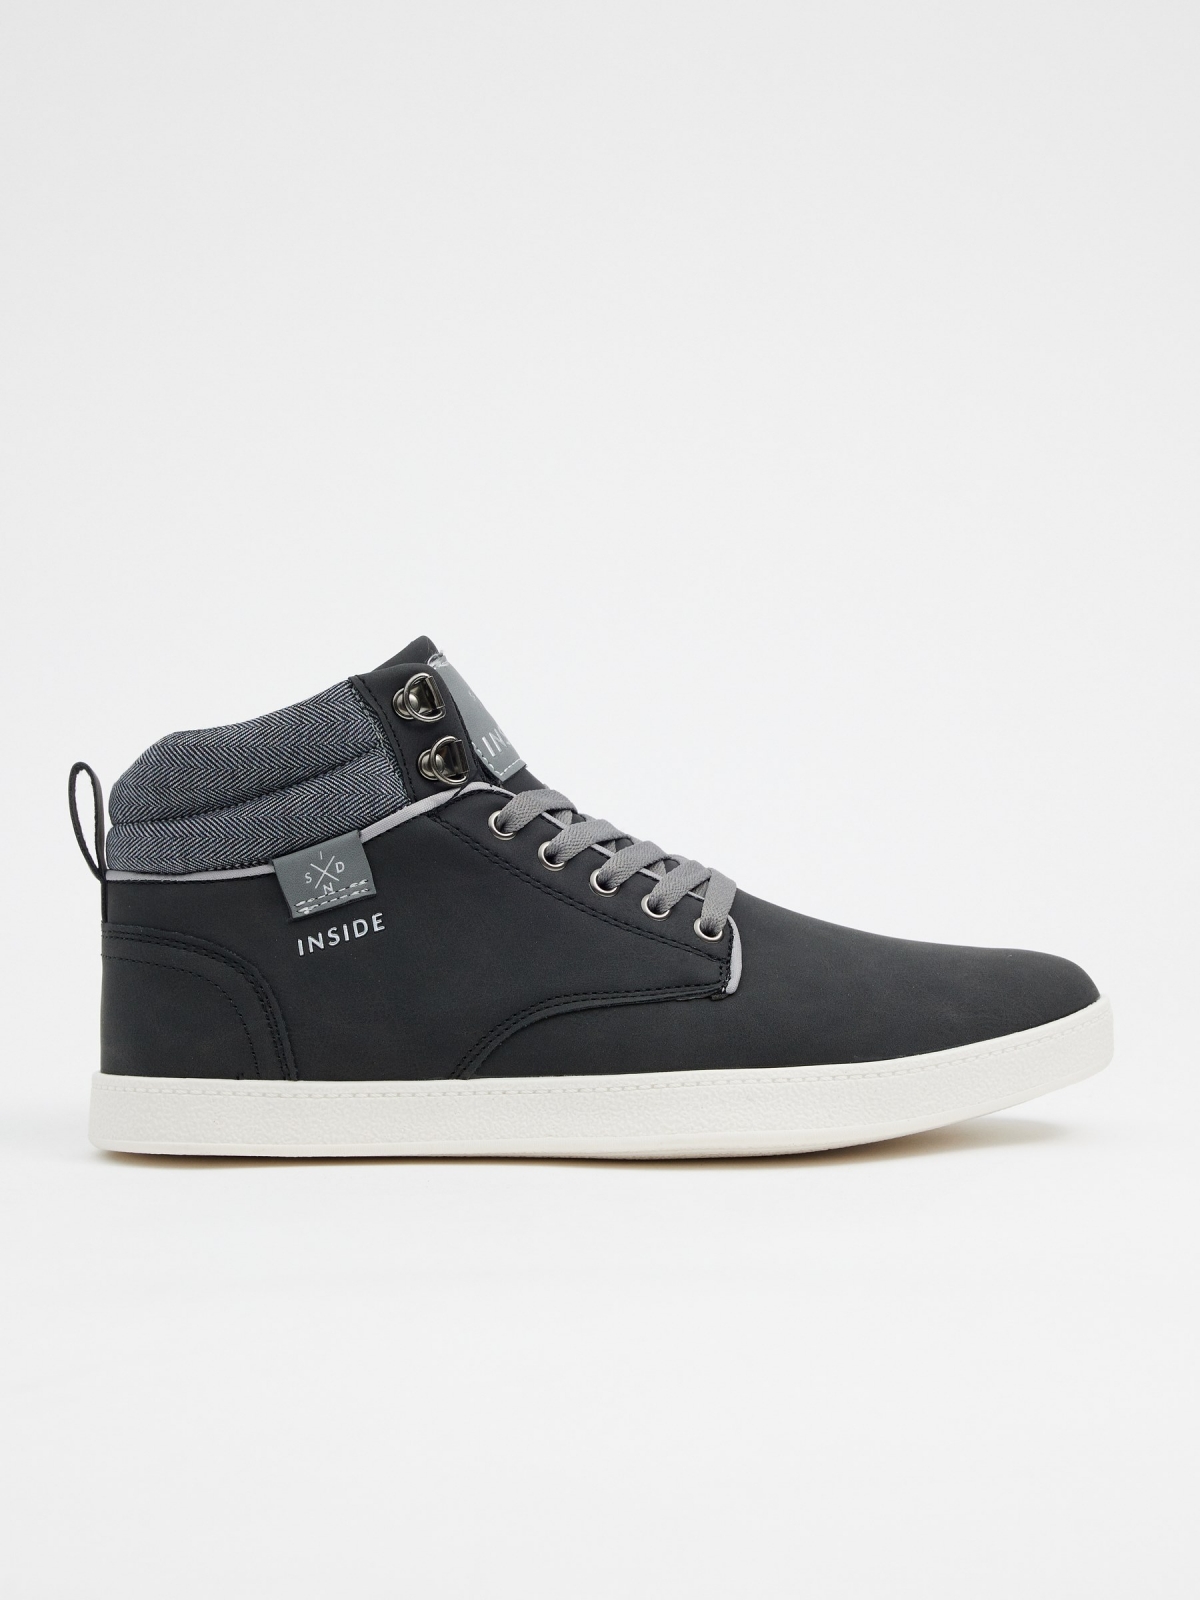 Sports Combined casual ankle boot black